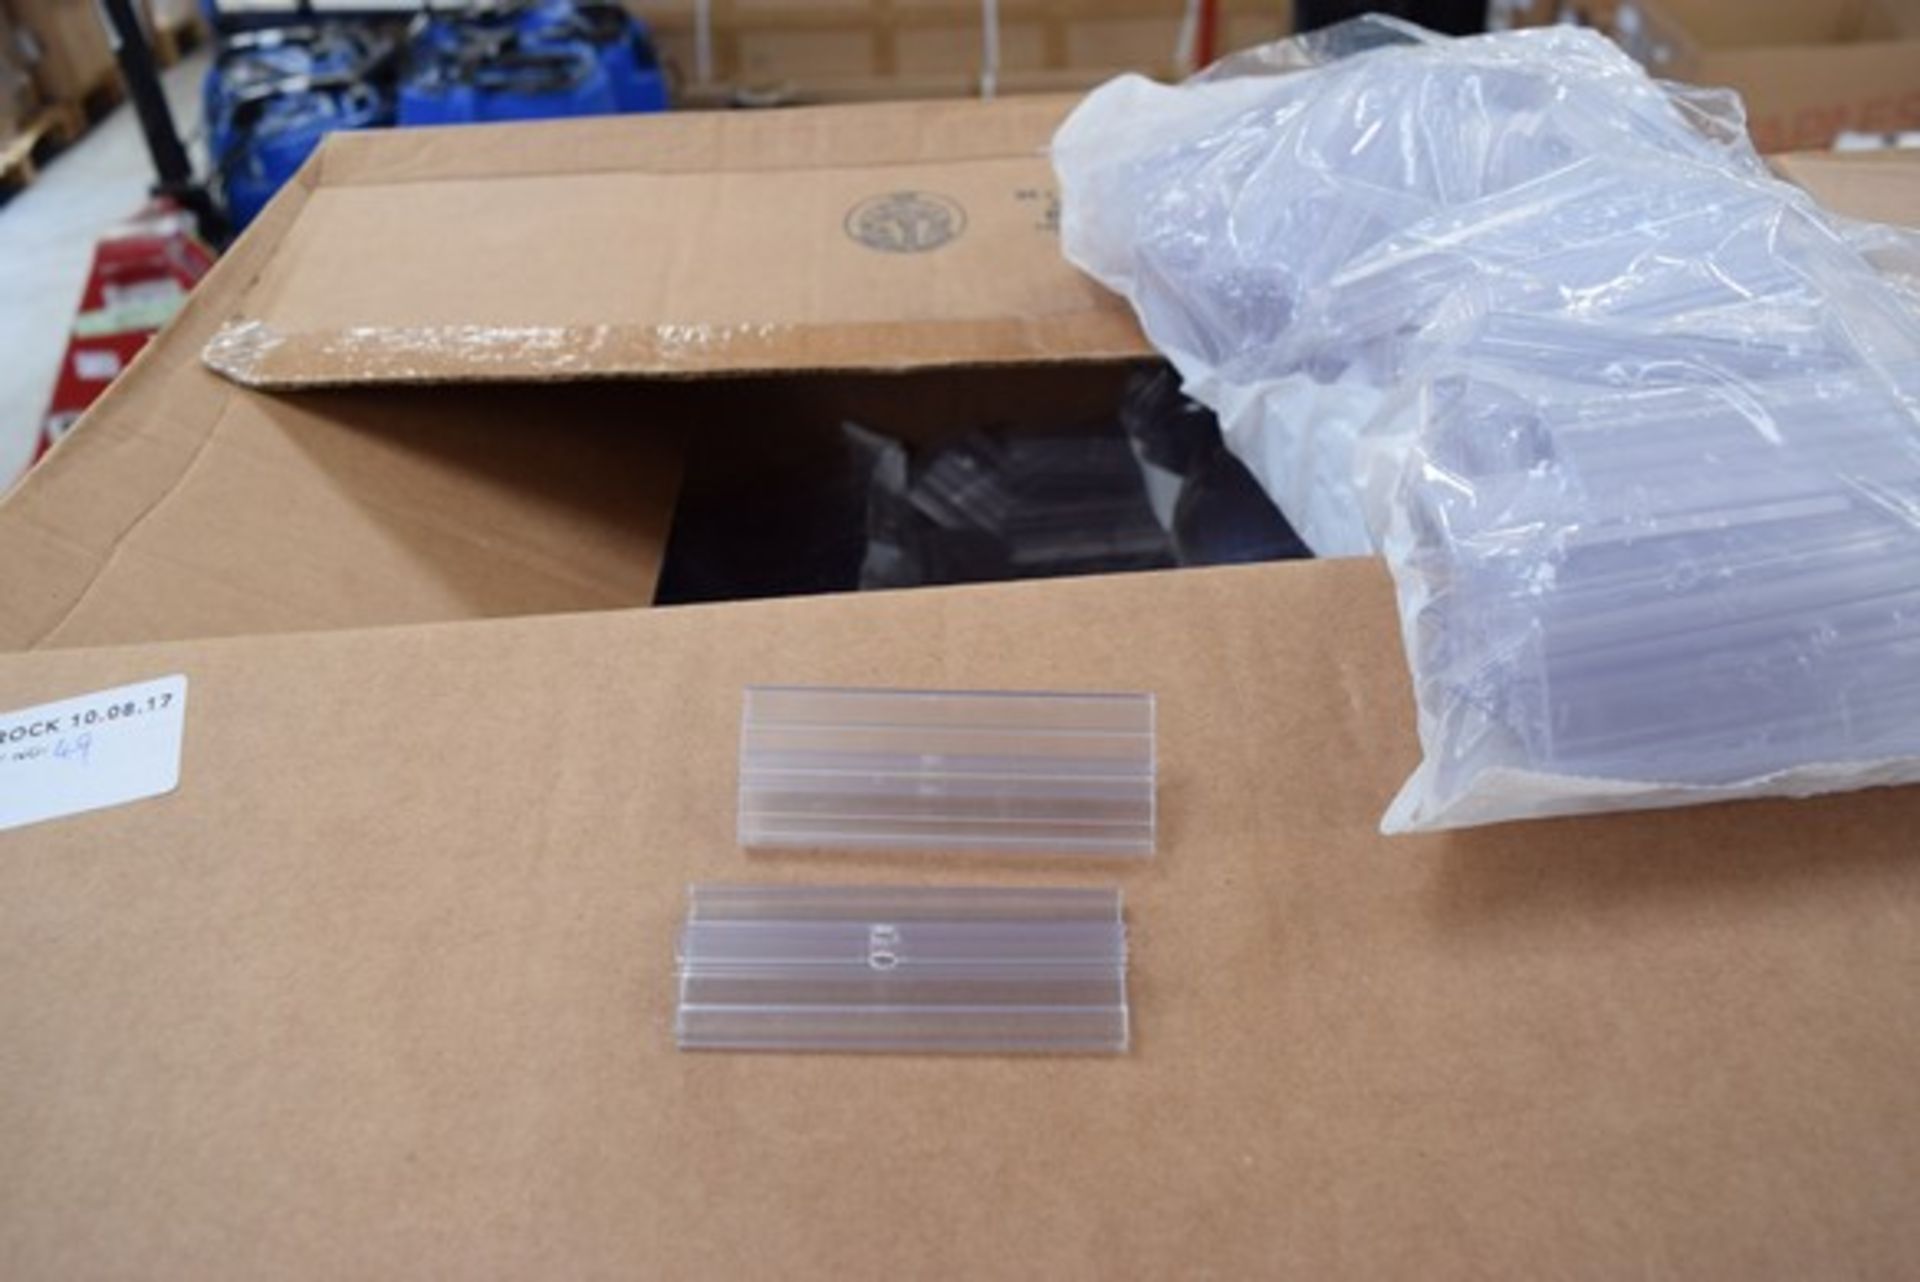 2 x BOXES CONTAINING (7 PACKS) OF PLASTIC DISPLAY CLIPS FOR RACKING RRP £7 A BOX 10.08.17 (P49) *